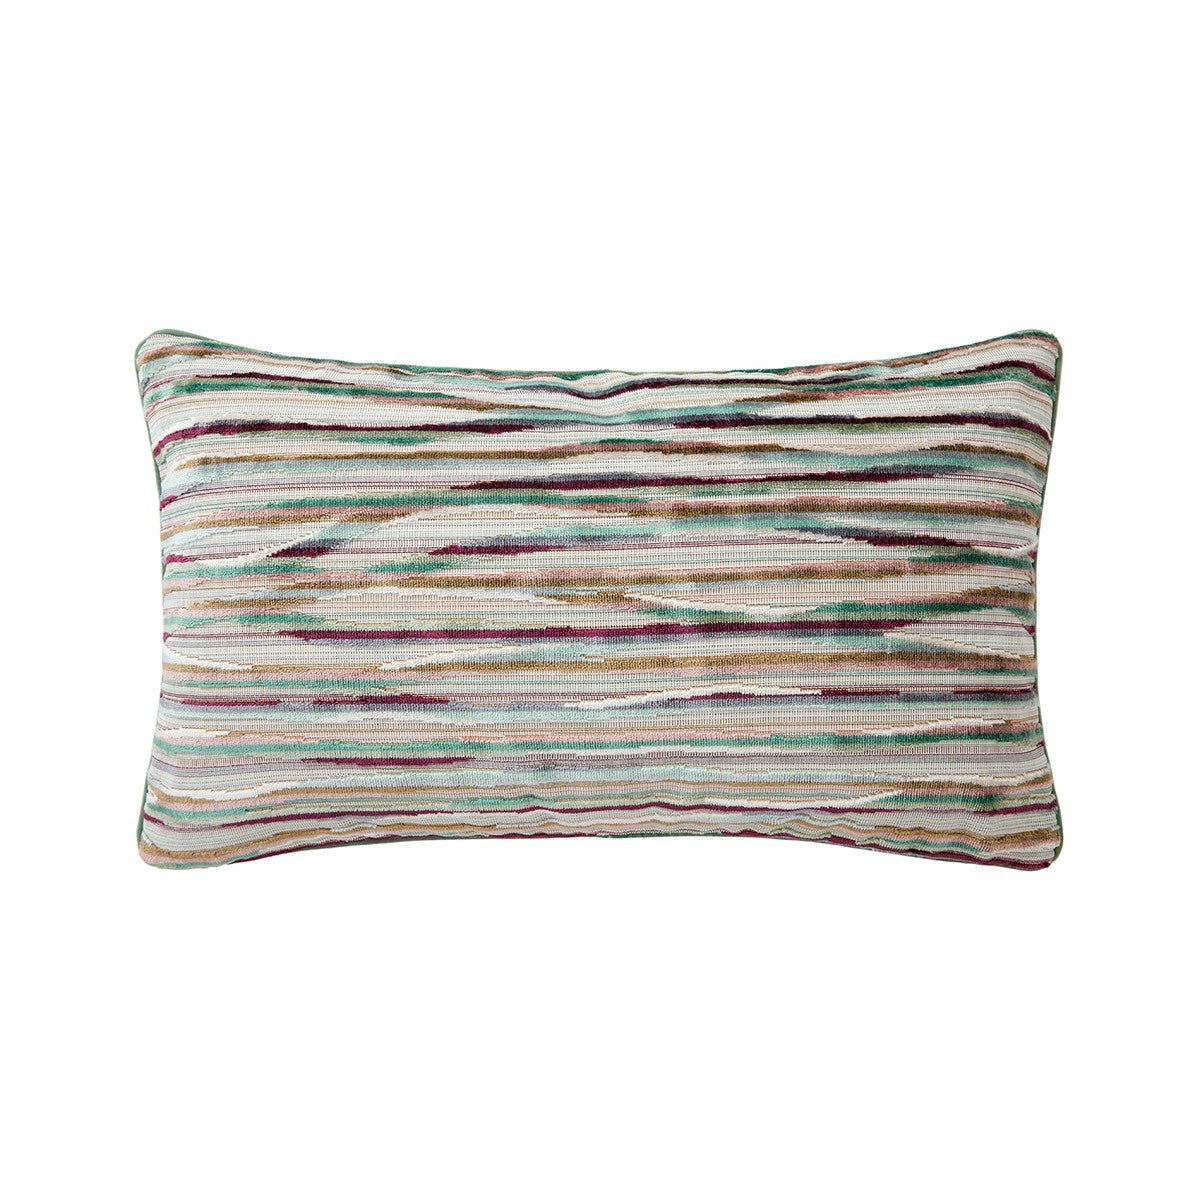 Yves Delorme Agate Decorative Pillow